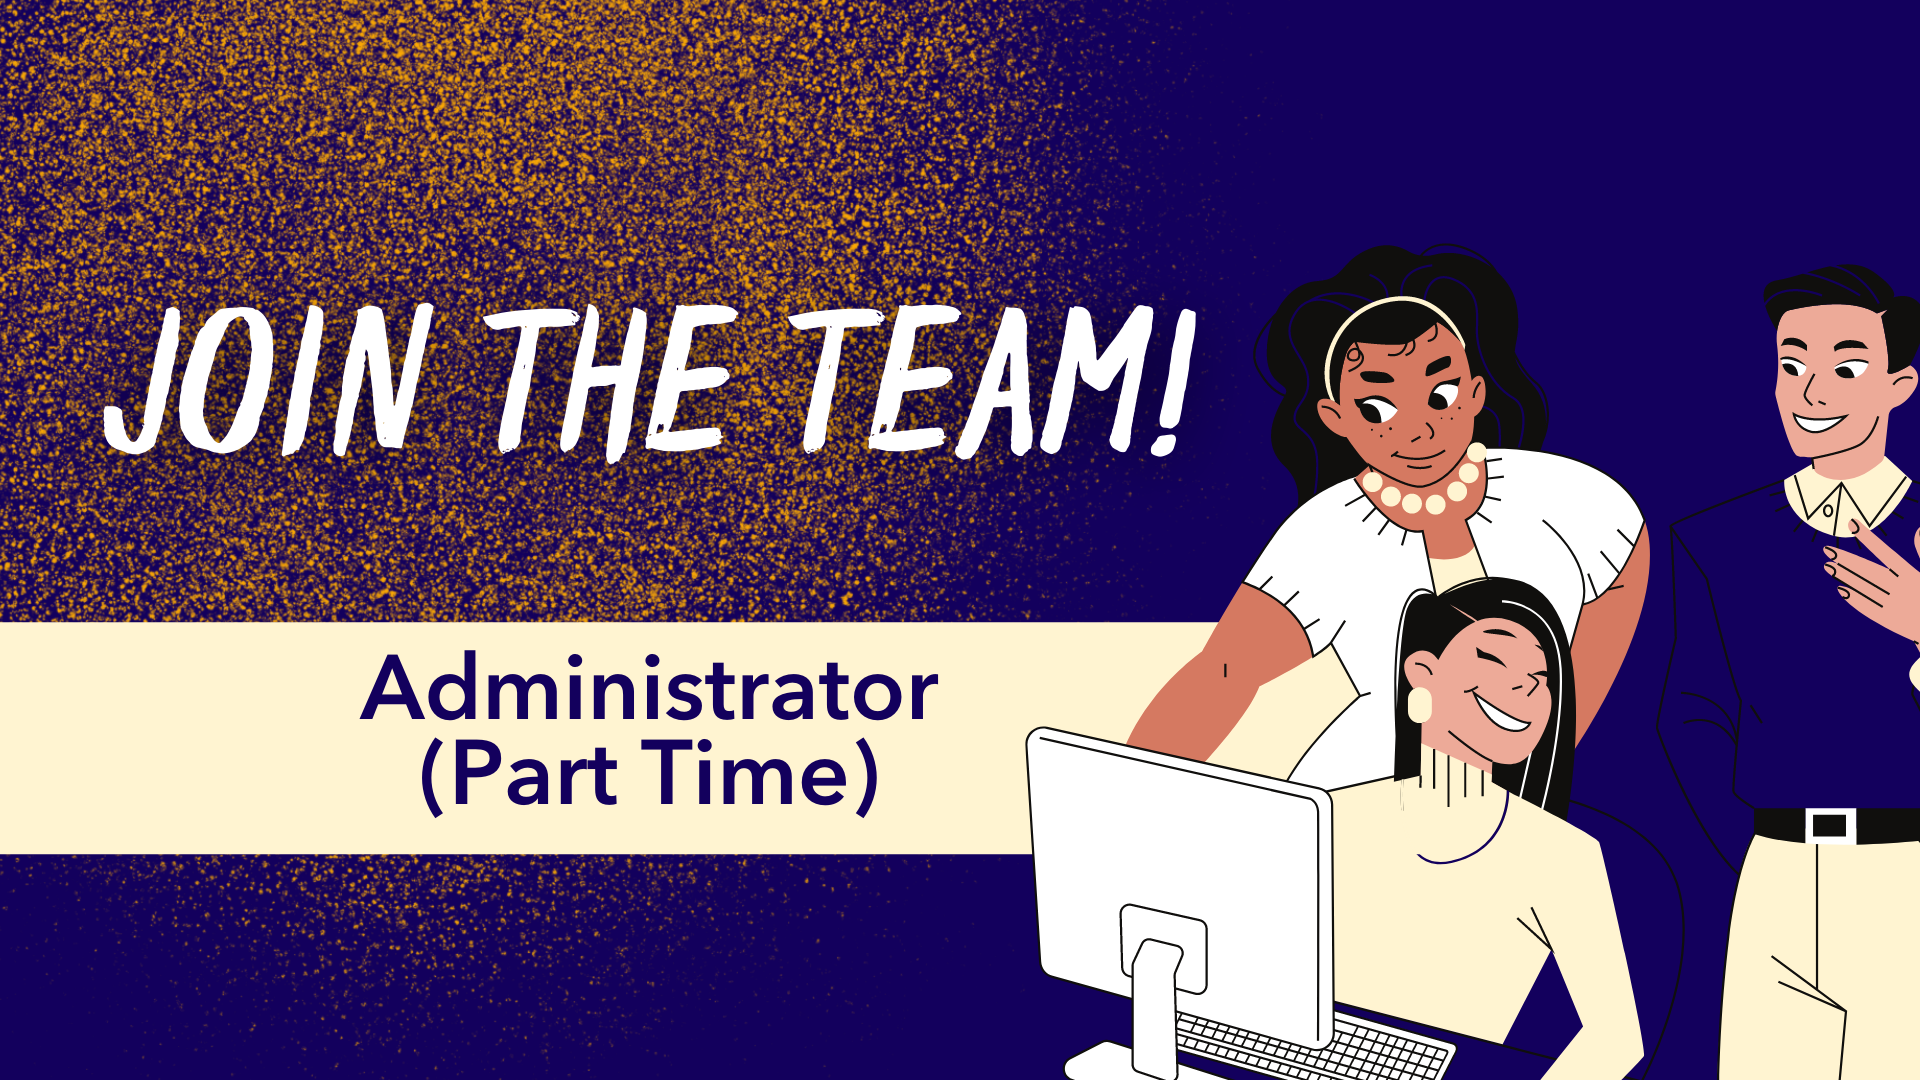 Background is blue with gold specs. "JOIN THE TEAM" is in large text. A cream rectangle highlights "Administrator (Part-Time). 3 work collegues are to the right conversing near a desk with a computer on top.